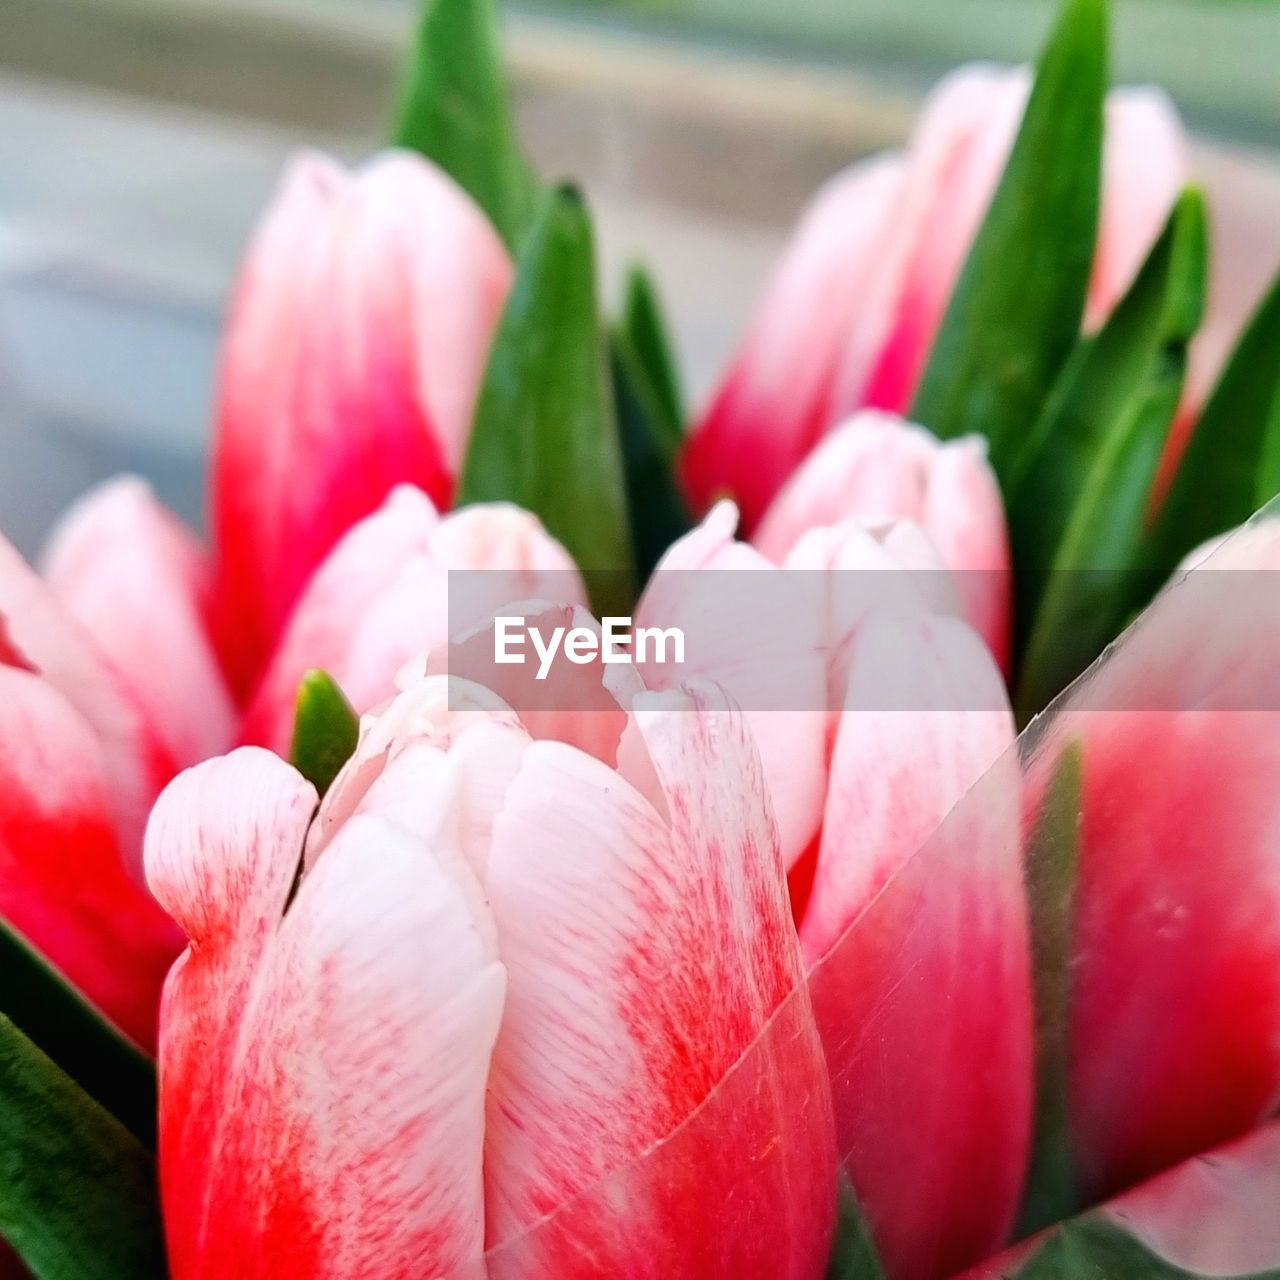 flower, plant, freshness, flowering plant, beauty in nature, pink, tulip, close-up, nature, petal, fragility, red, no people, leaf, flower head, plant part, inflorescence, growth, focus on foreground, outdoors, vibrant color, day, springtime, green